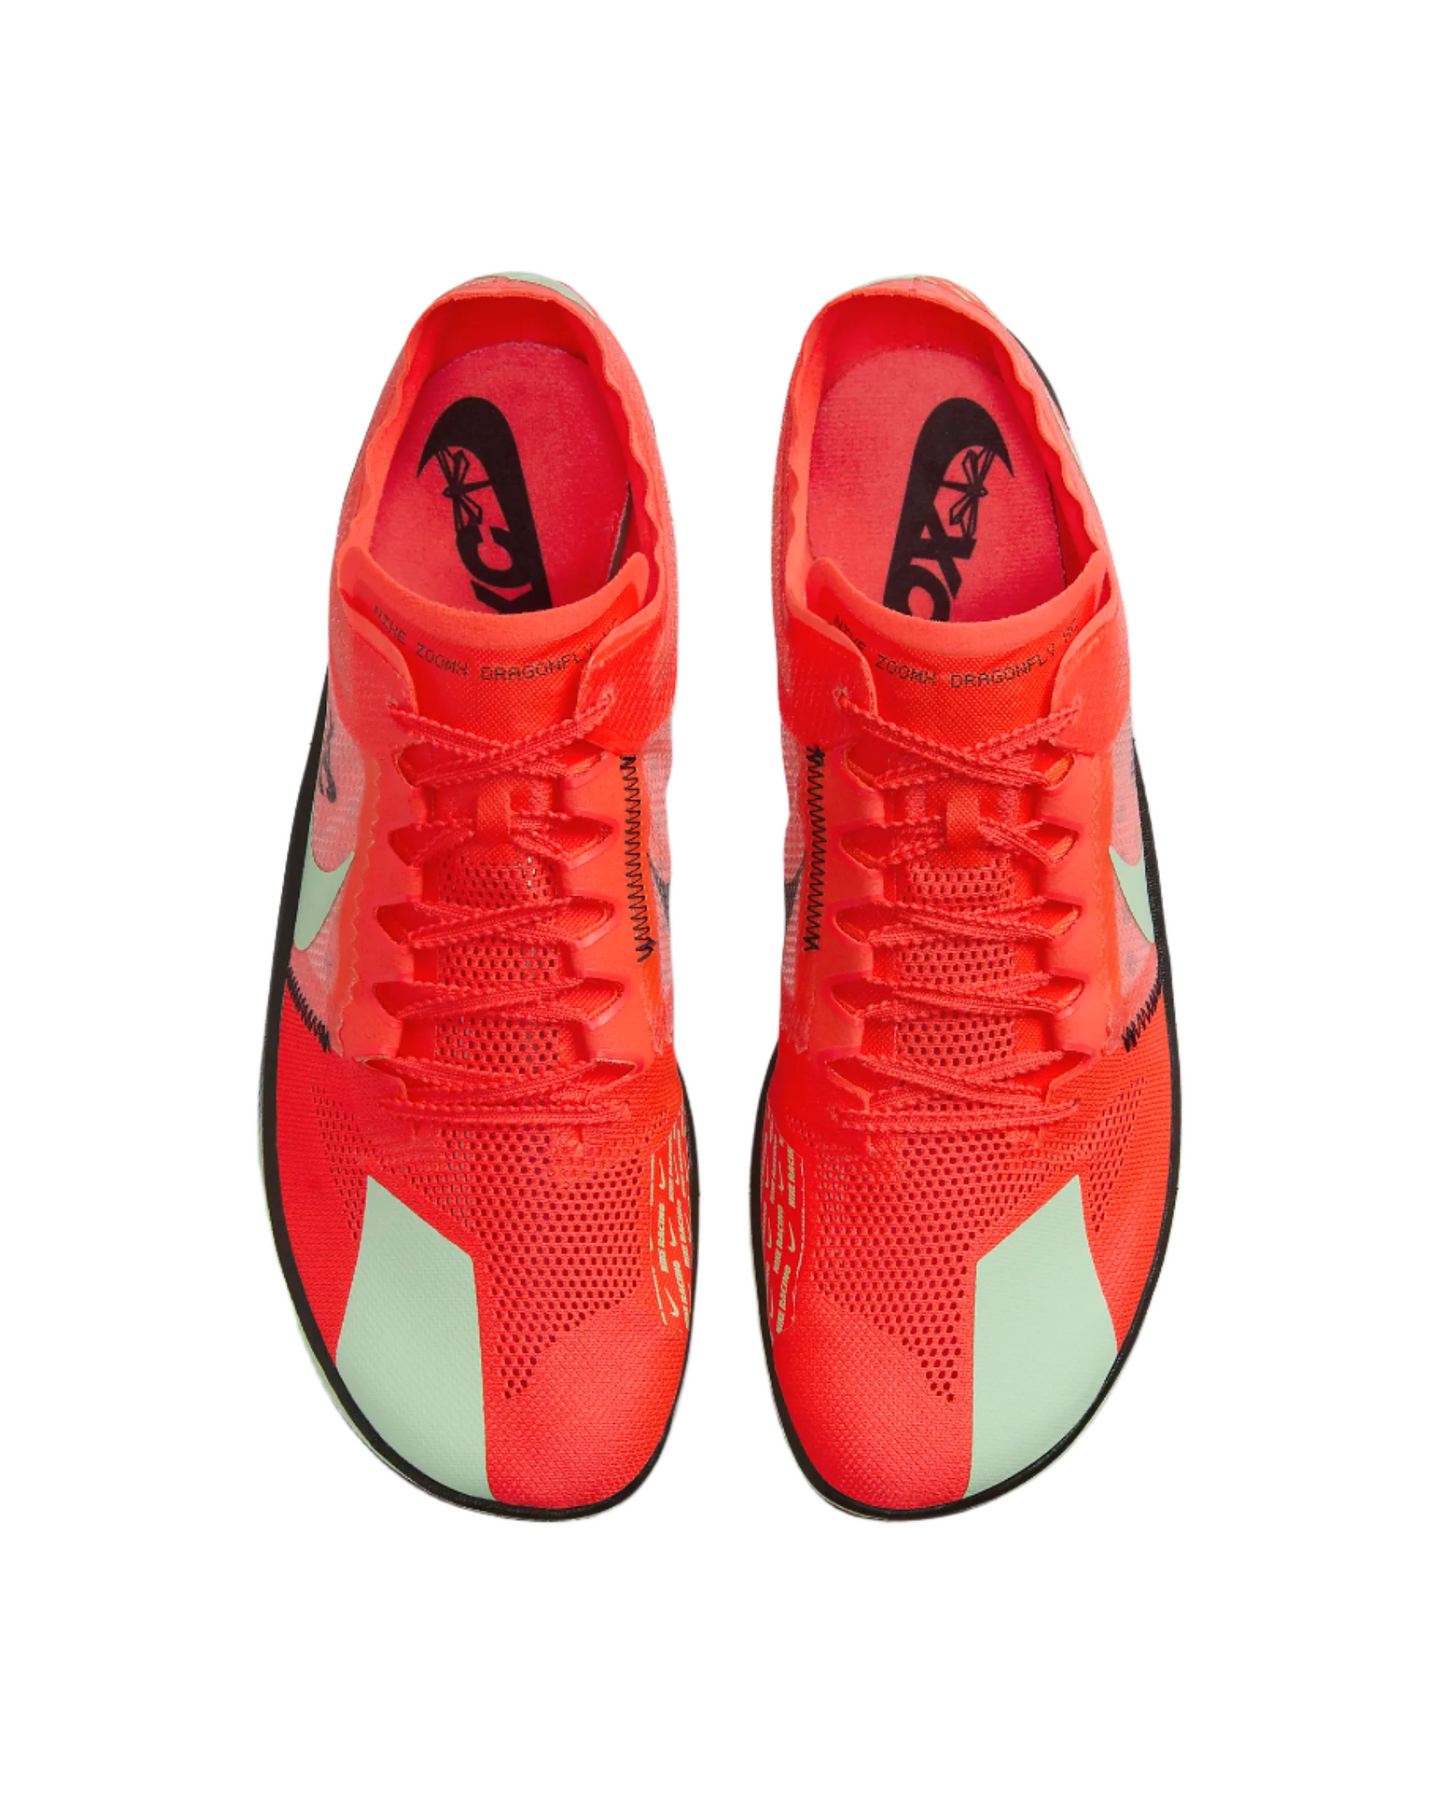 Mens Nike ZoomX Dragonfly XC